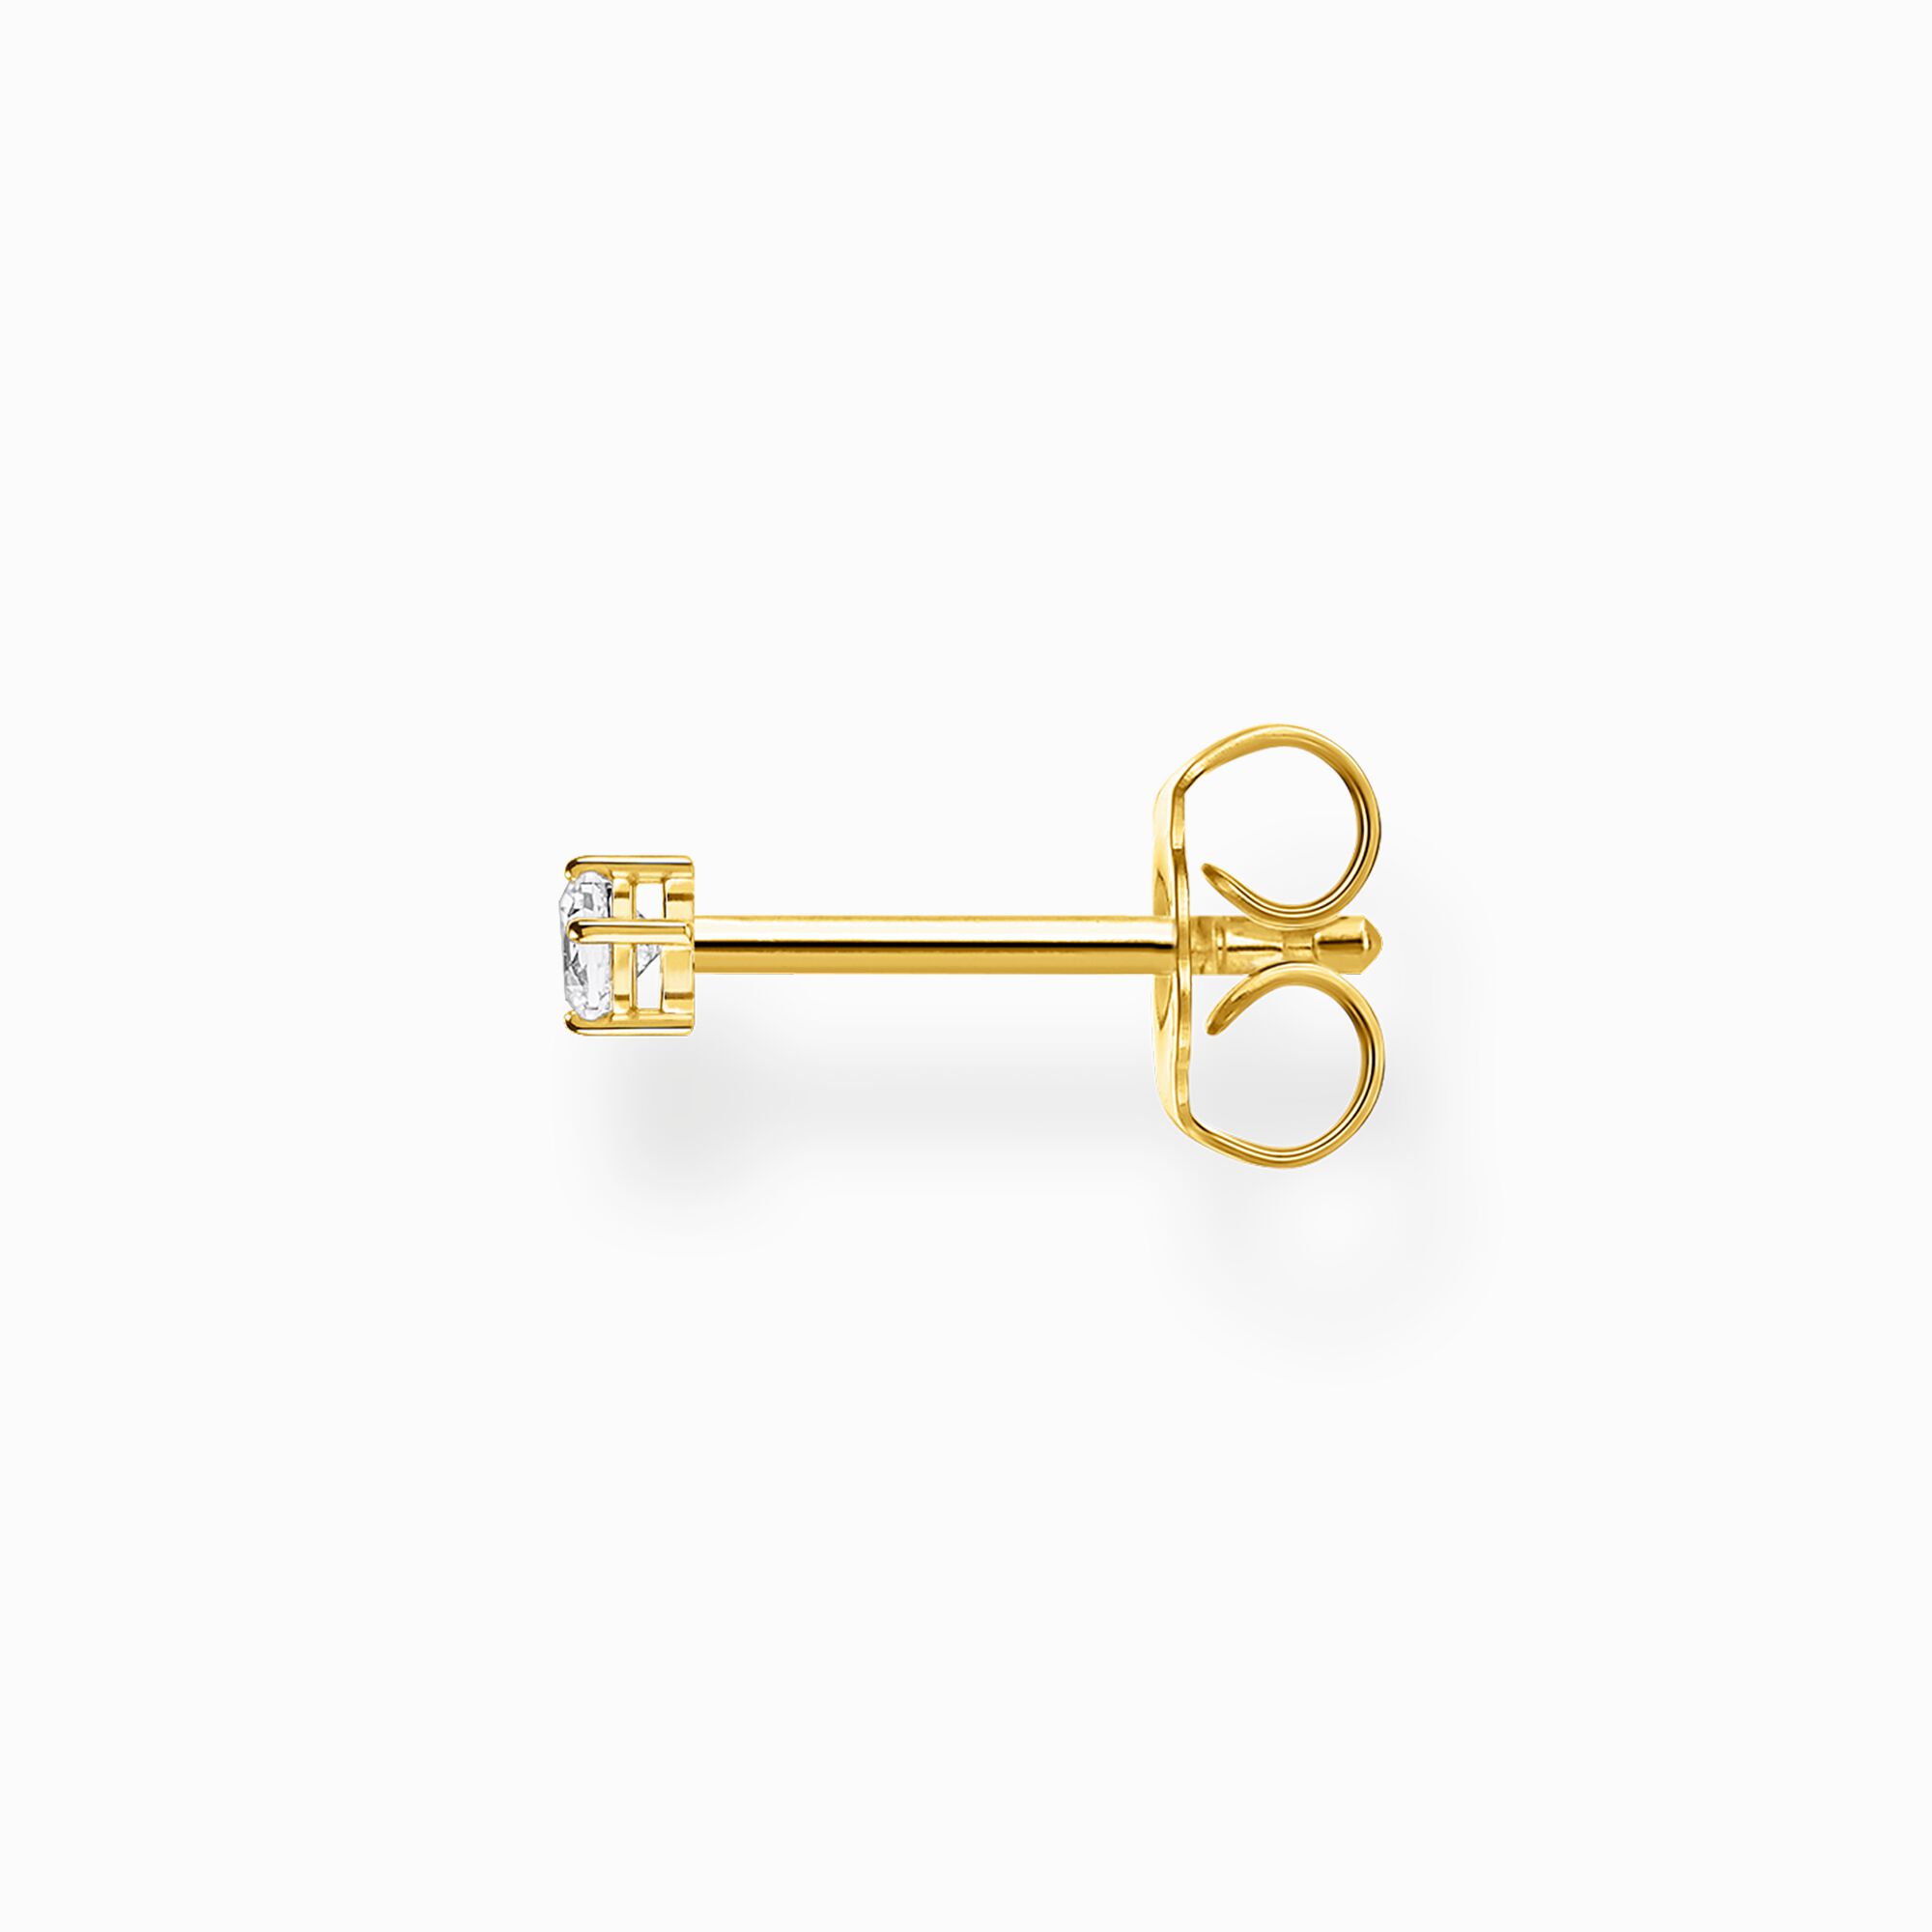 Ear stud in │ centrepiece gold THOMAS SABO zirconia with